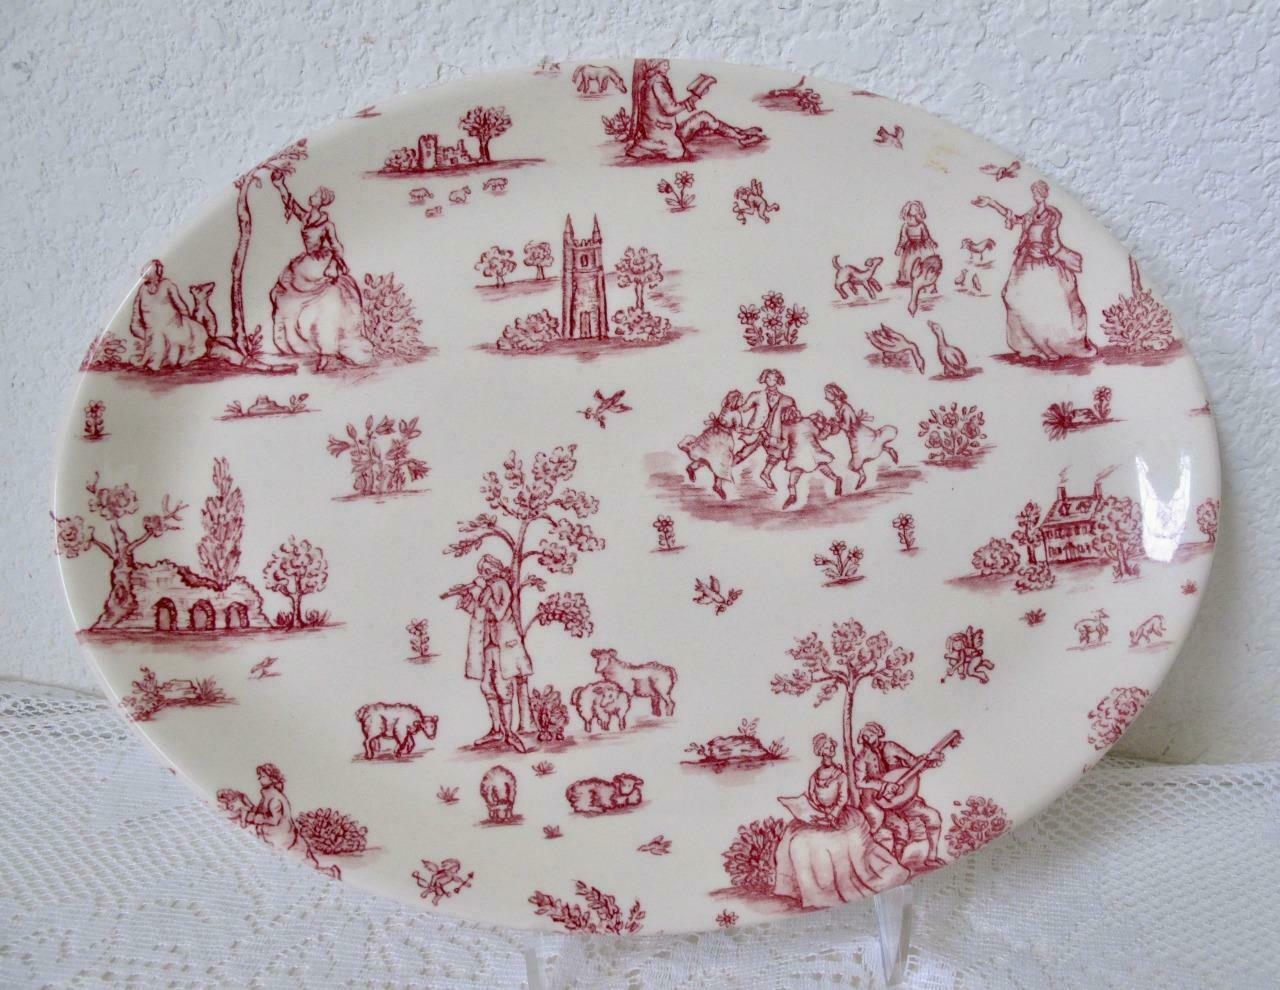 Wood & Sons Toille De Jouy Pink / Red 12" Oval Serving Platter England Toile